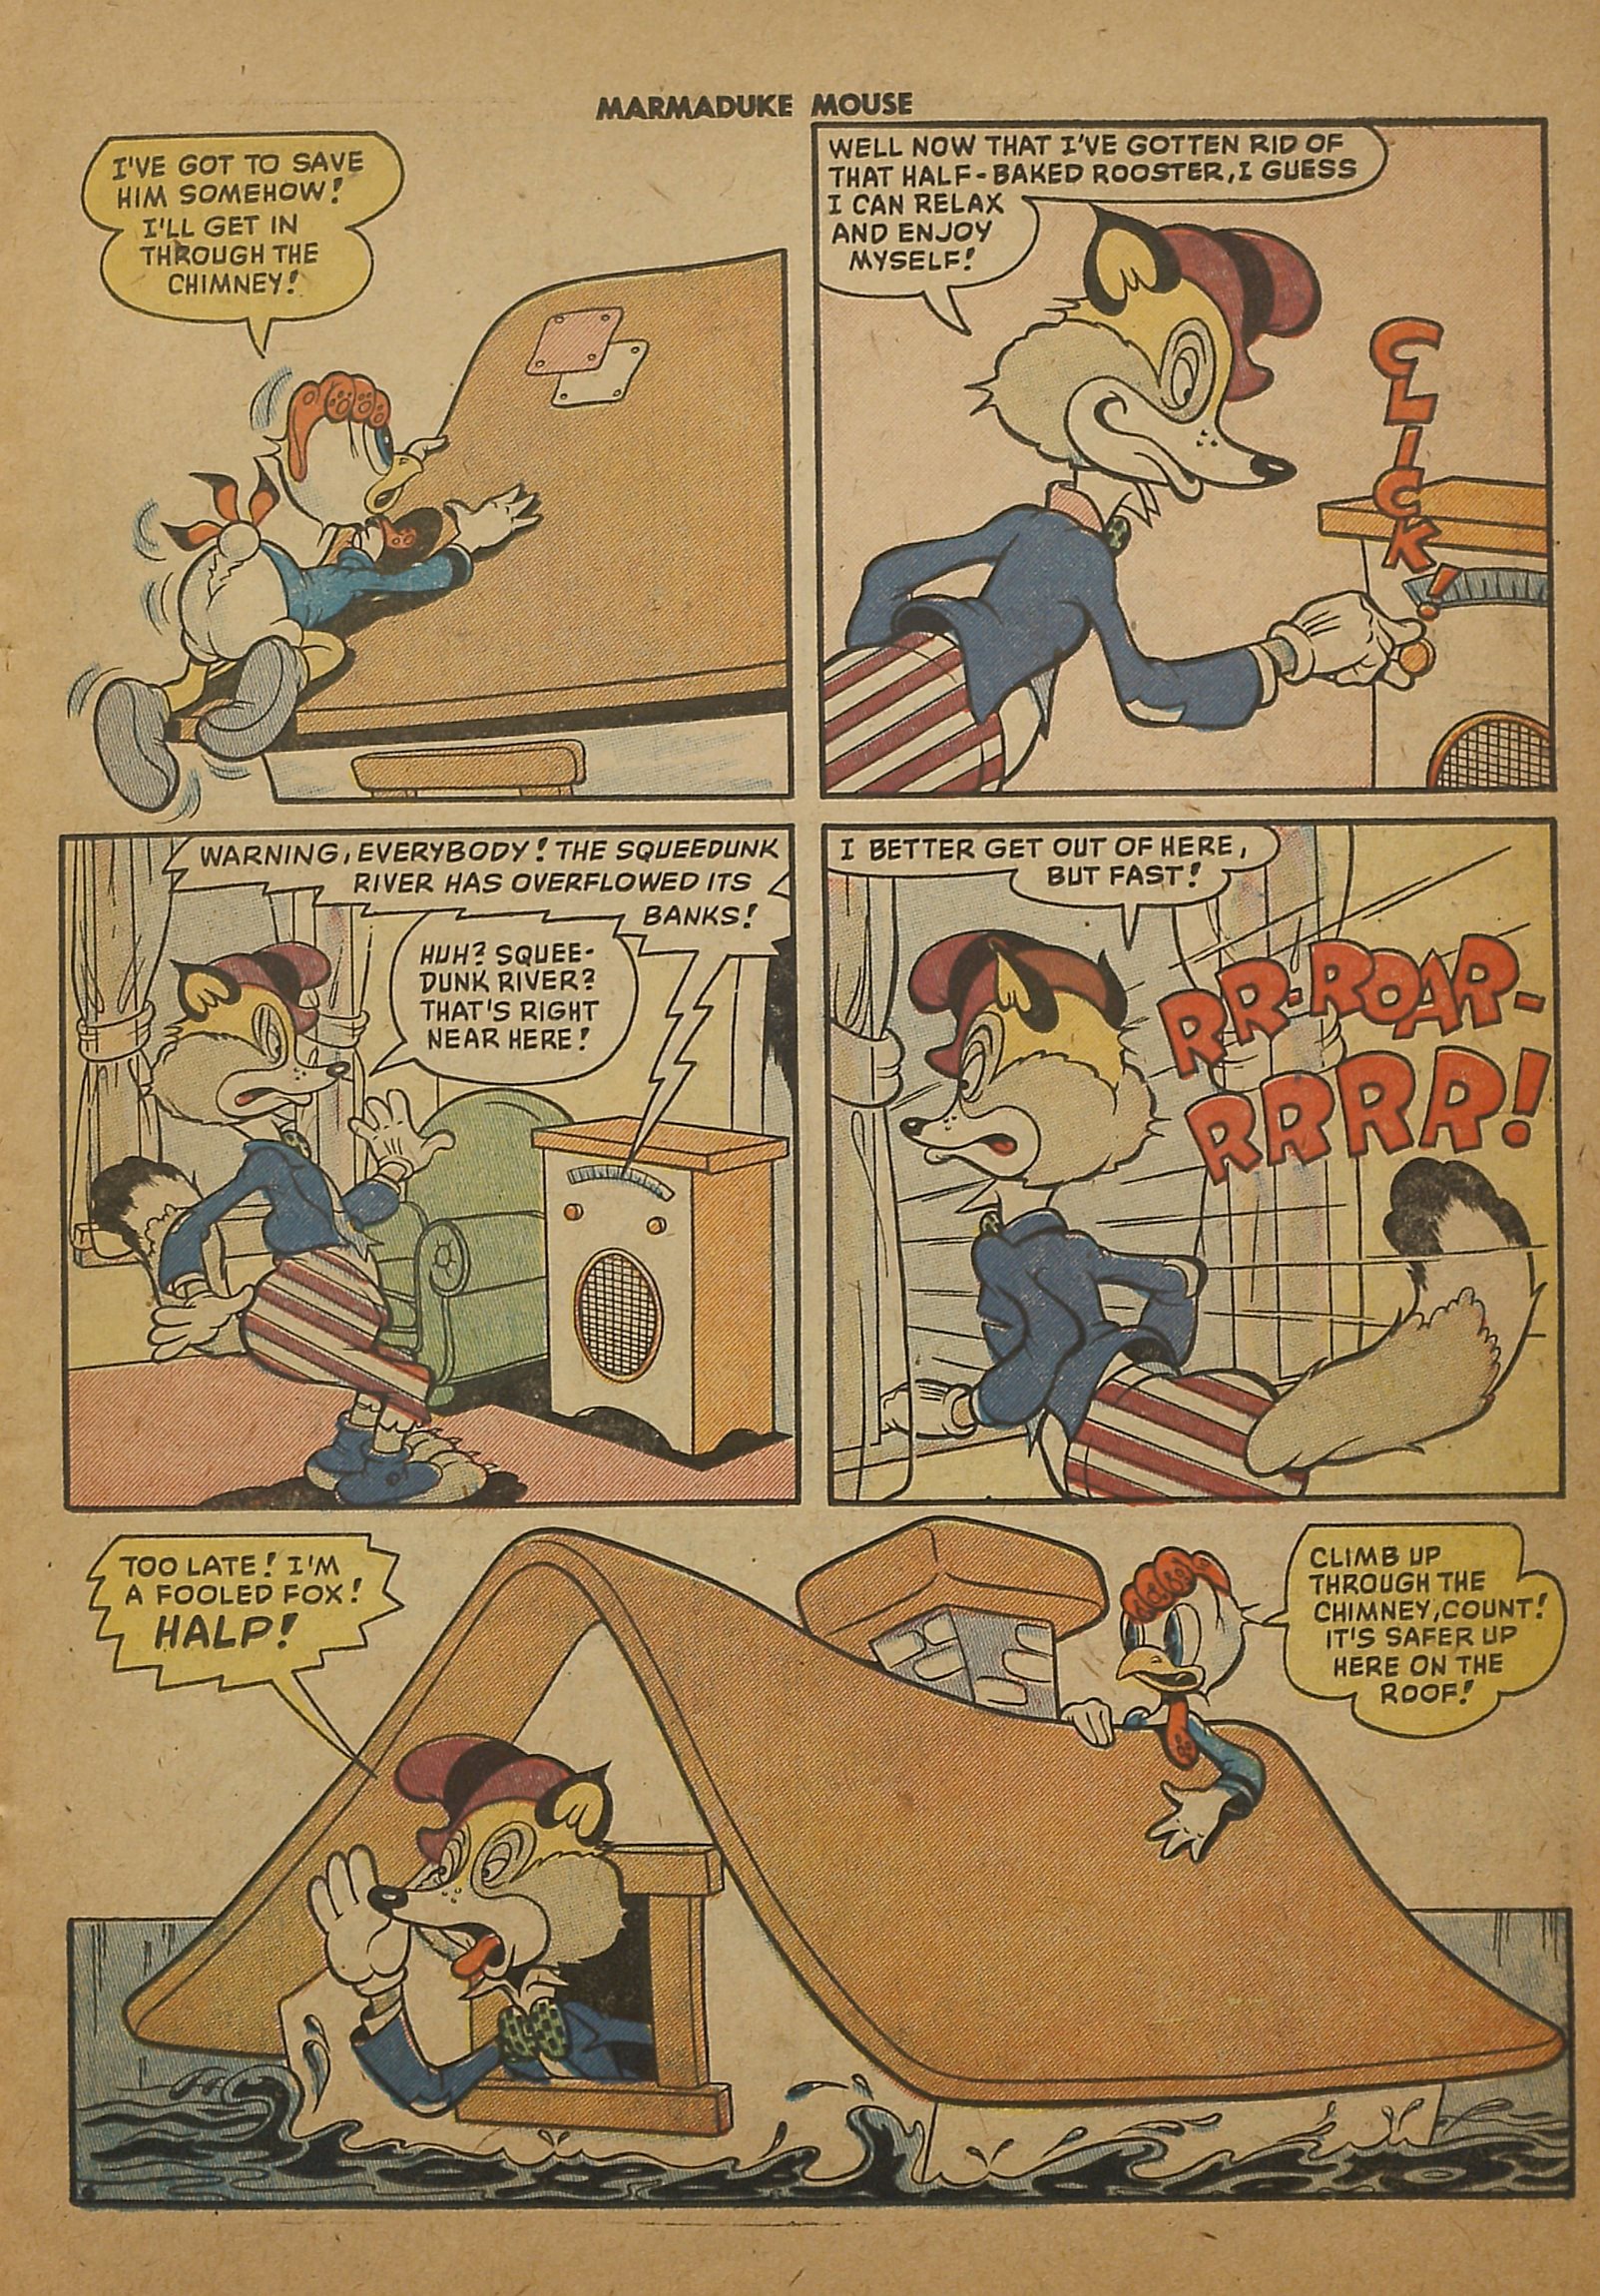 Read online Marmaduke Mouse comic -  Issue #51 - 15